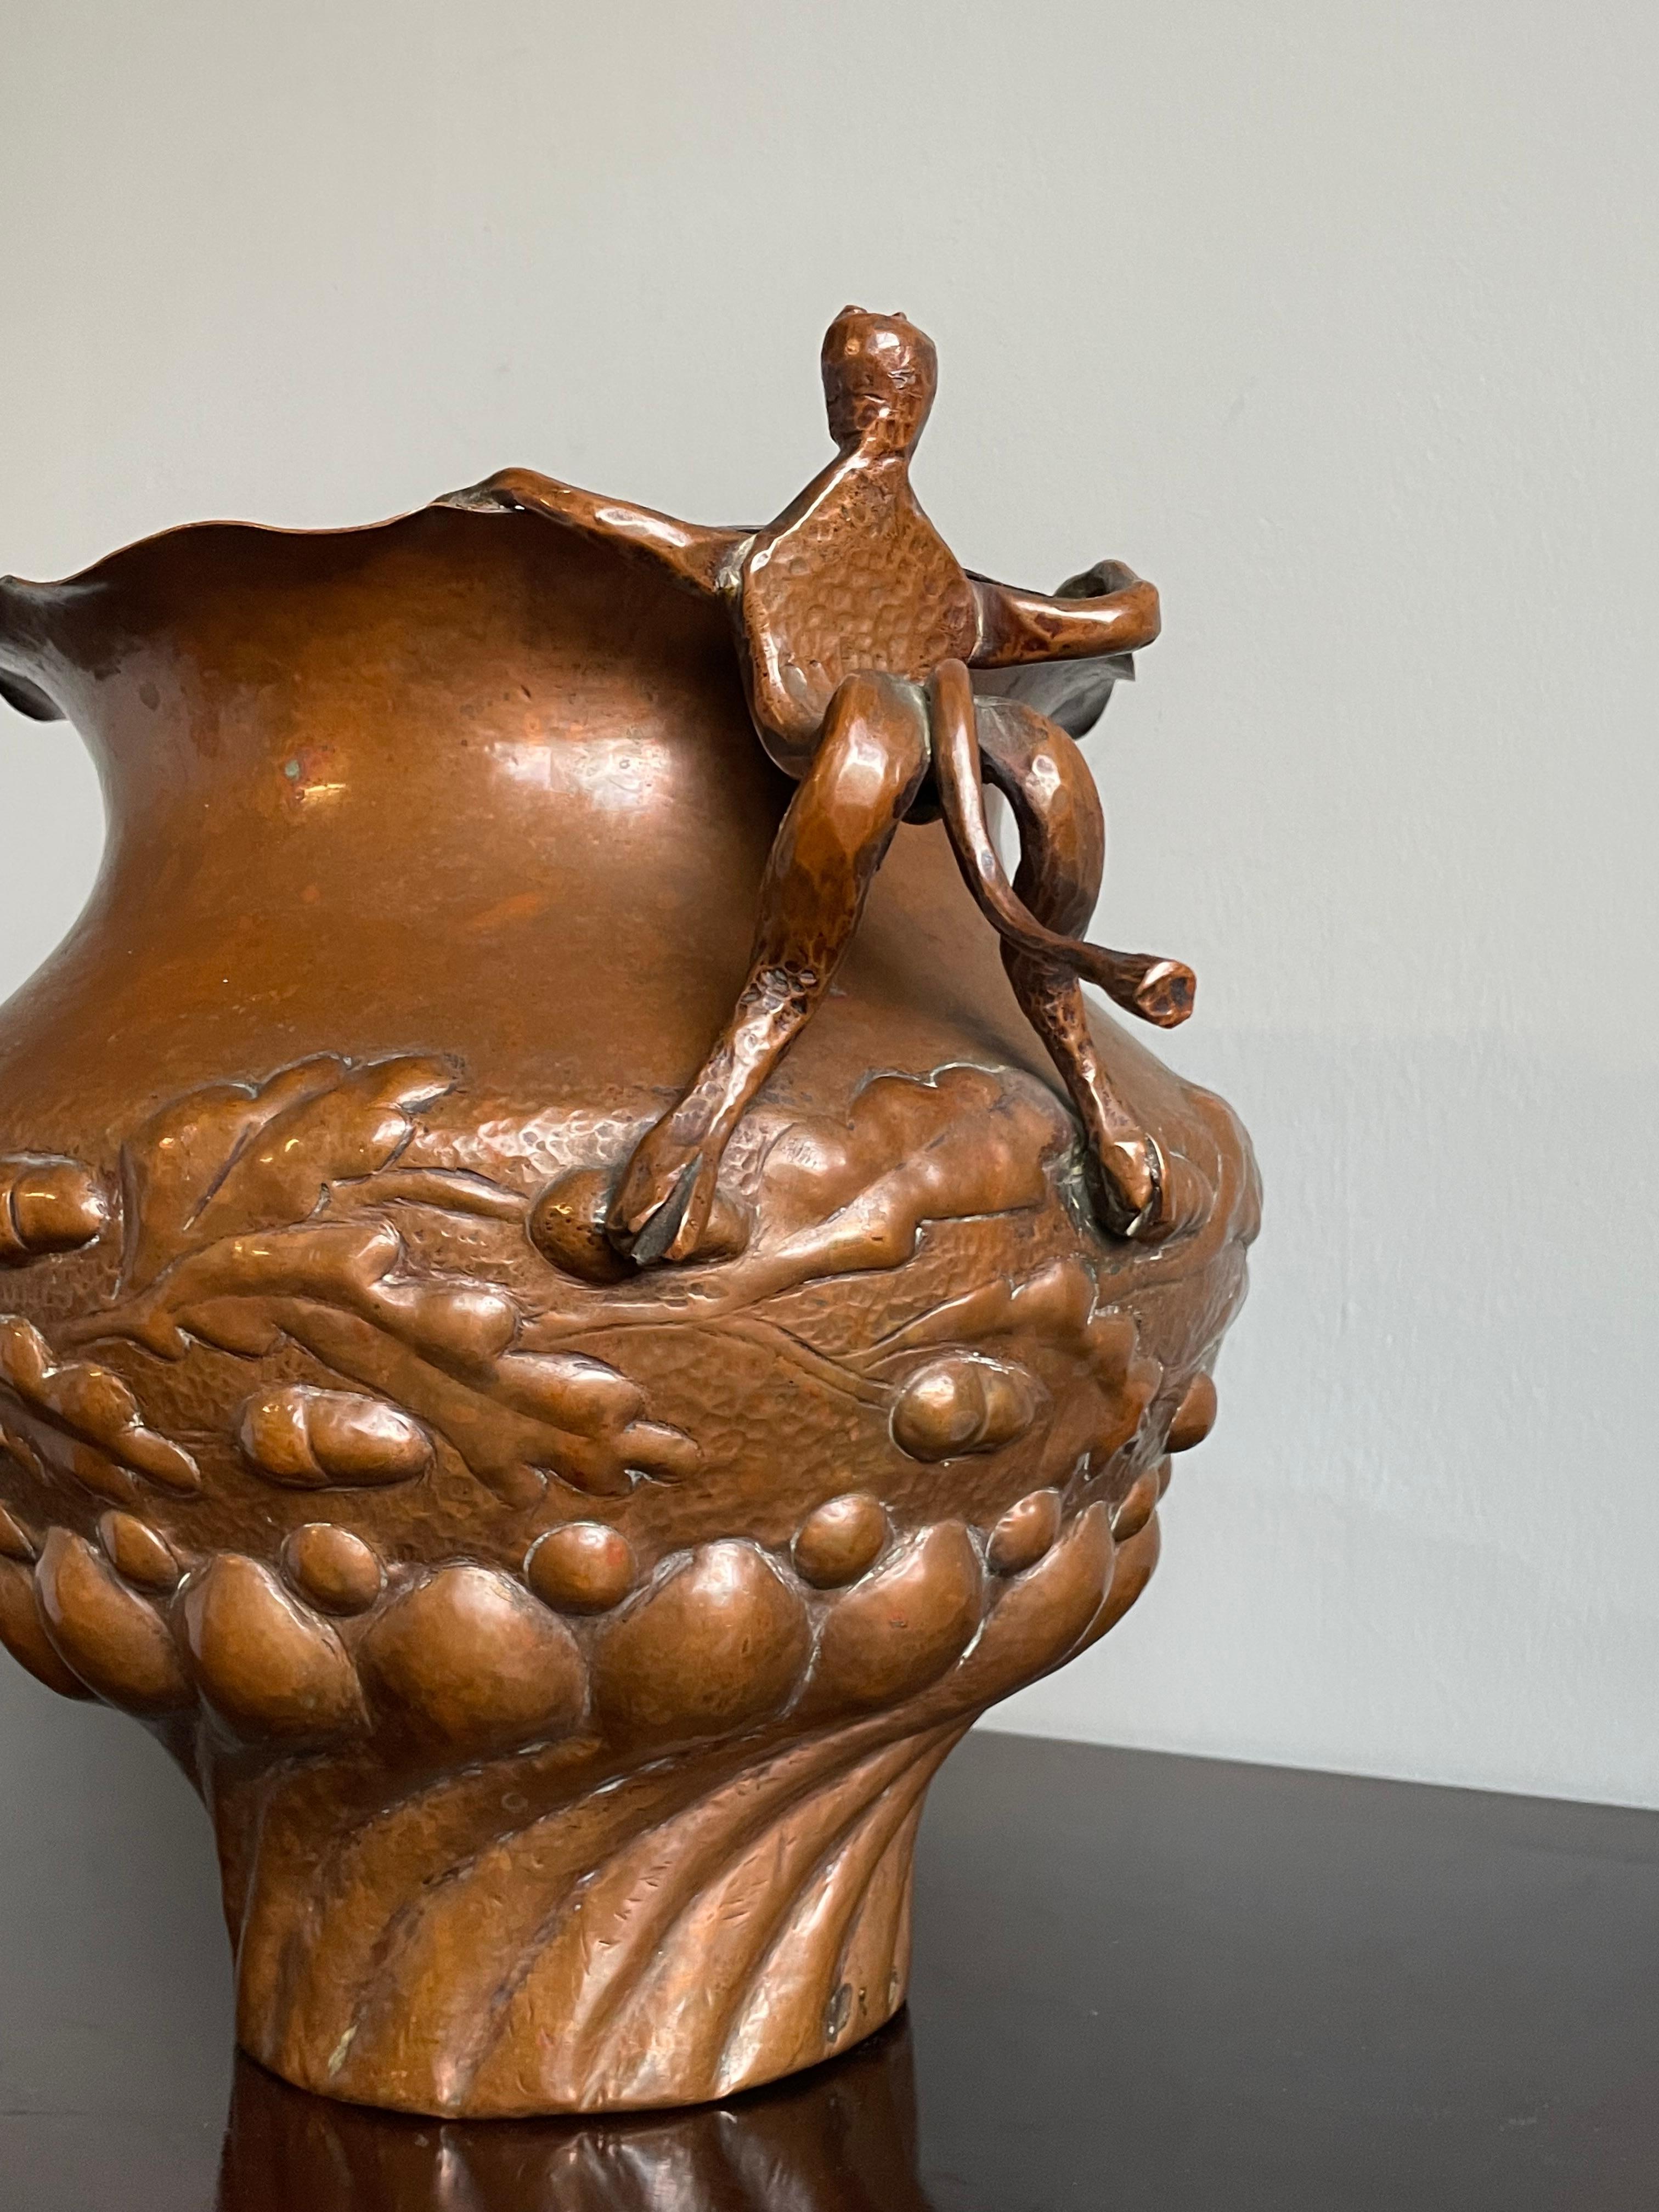 Museum quality, embossed copper planter with rare satyr theme.

This stunning and superbly hand-crafted antique copper planter or vase is another one of our recent unique finds. It has the most amazing, deeply embossed acorn and oak leaf patterns